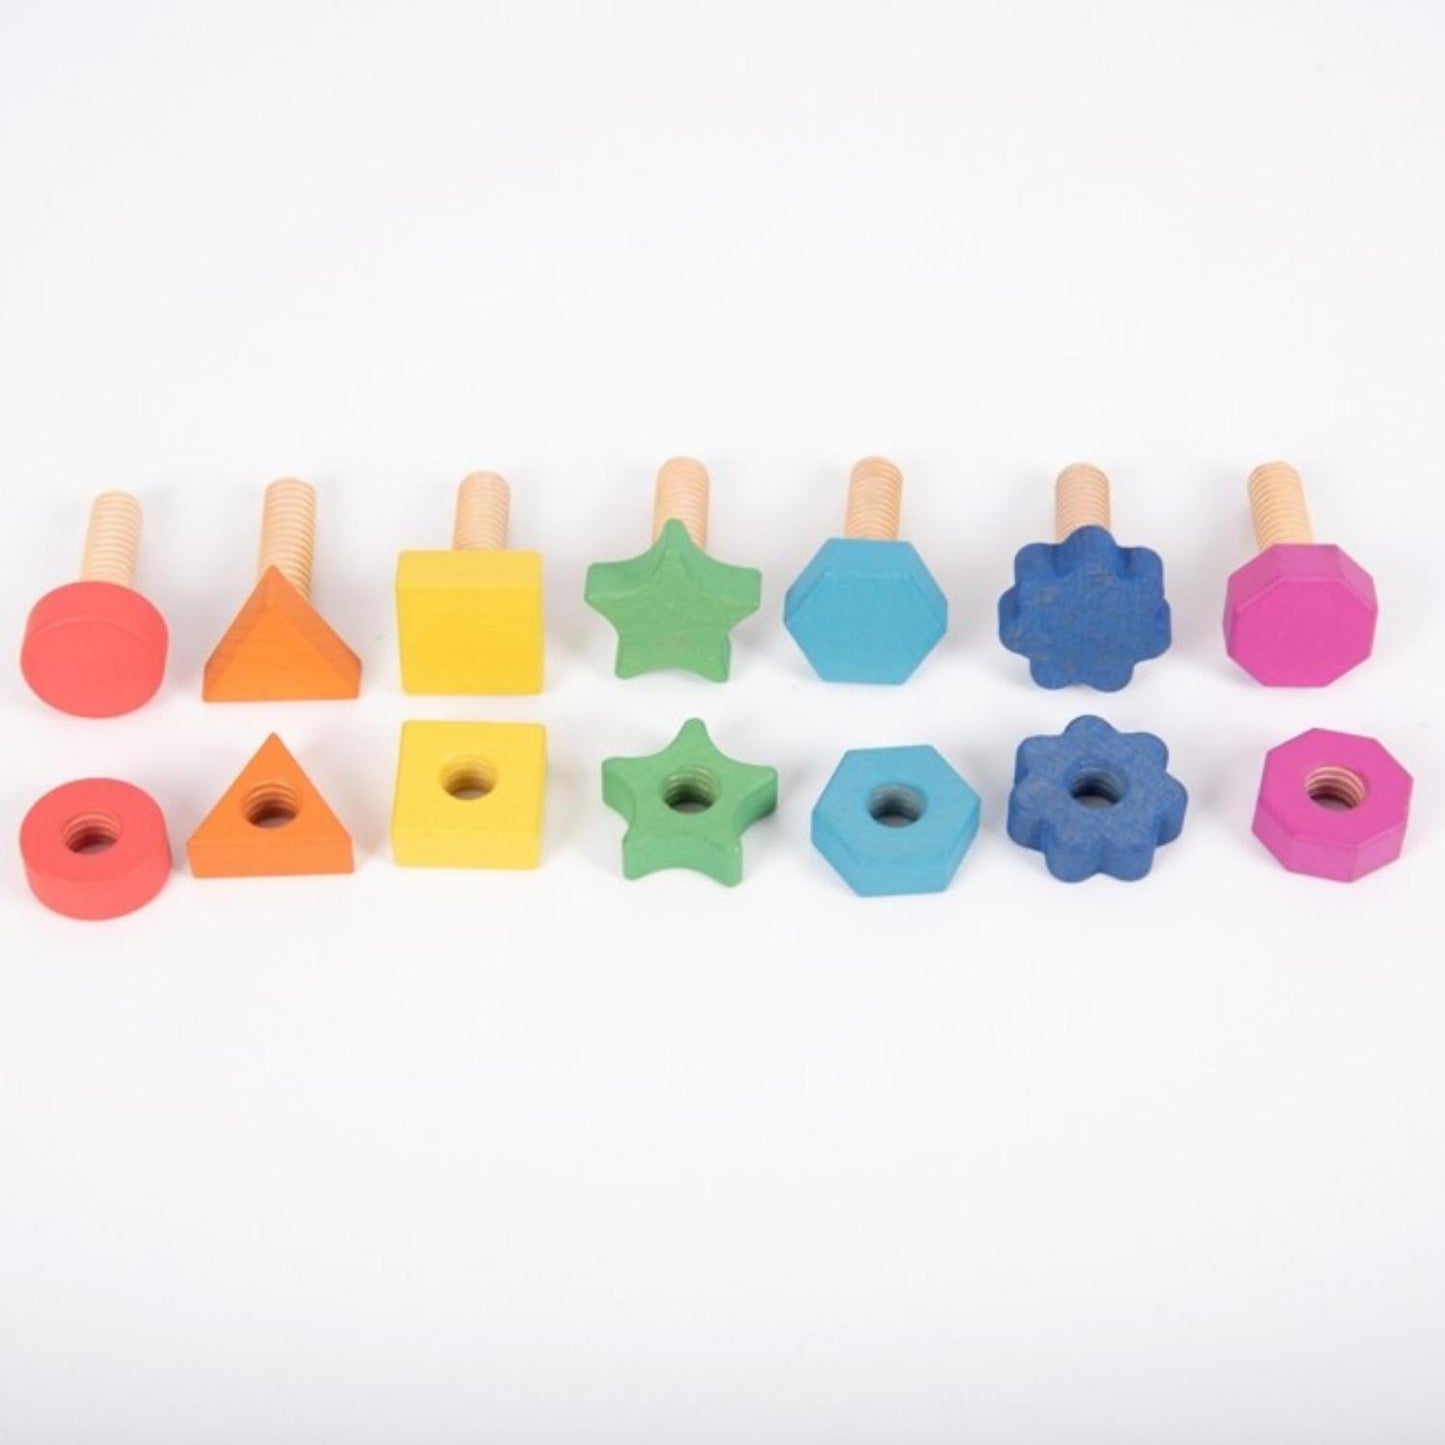 TickiT Rainbow Wooden Nuts & Bolts| Set of 7 Pieces | Wooden Loose Parts | Open-Ended Toys | Front View – Nuts & Bolts Not Assembled | BeoVERDE.ie